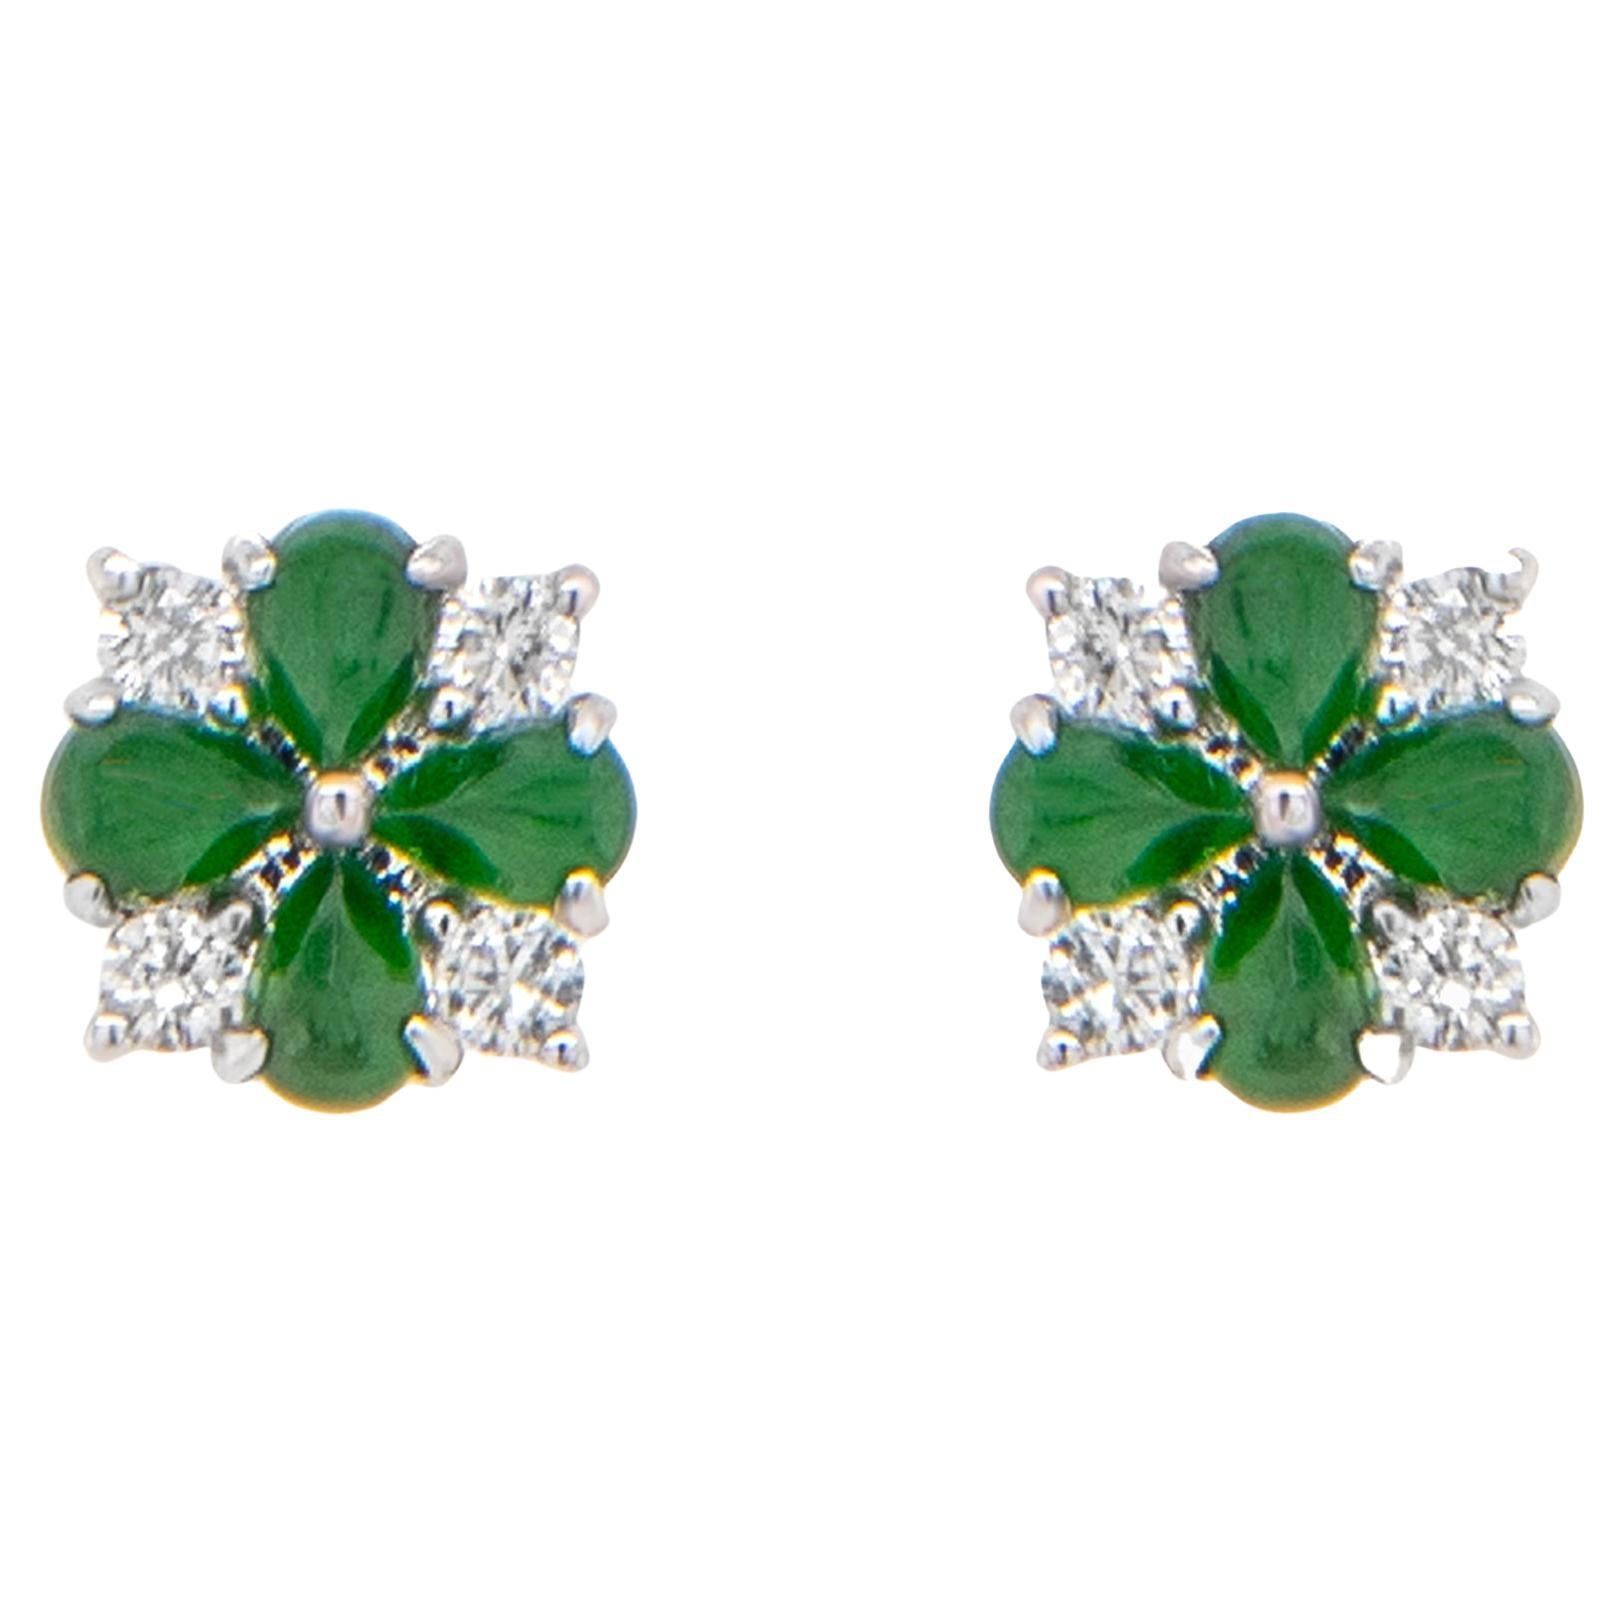 Contemporary Very Fine Imperial Jade and Diamond Stud Earrings 18k White Gold